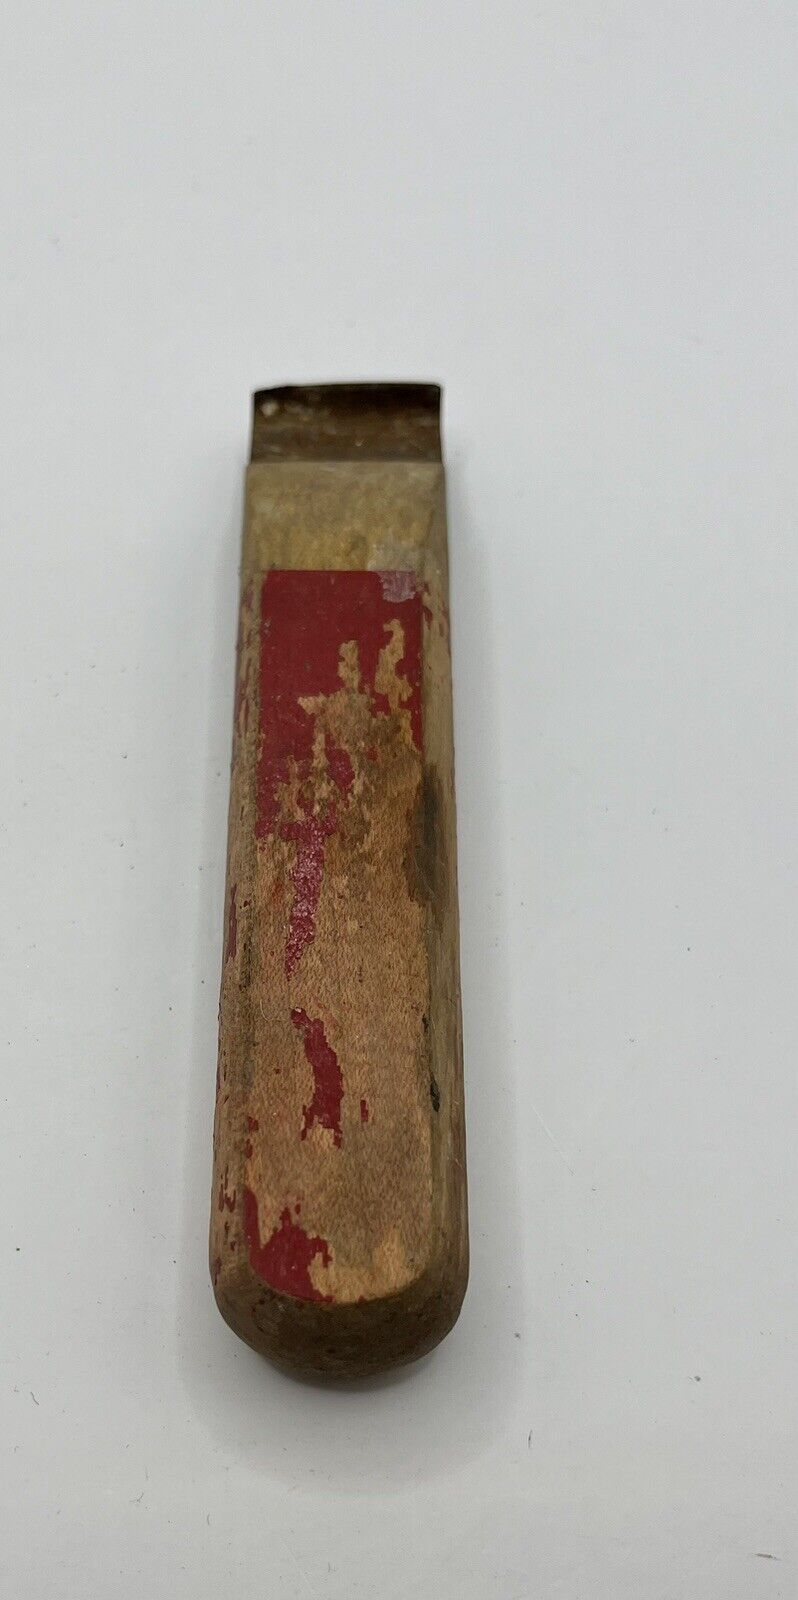 Vintage Red Devil Wooden Red Scraper Tool NO. 10 Union New Jersey Advertising